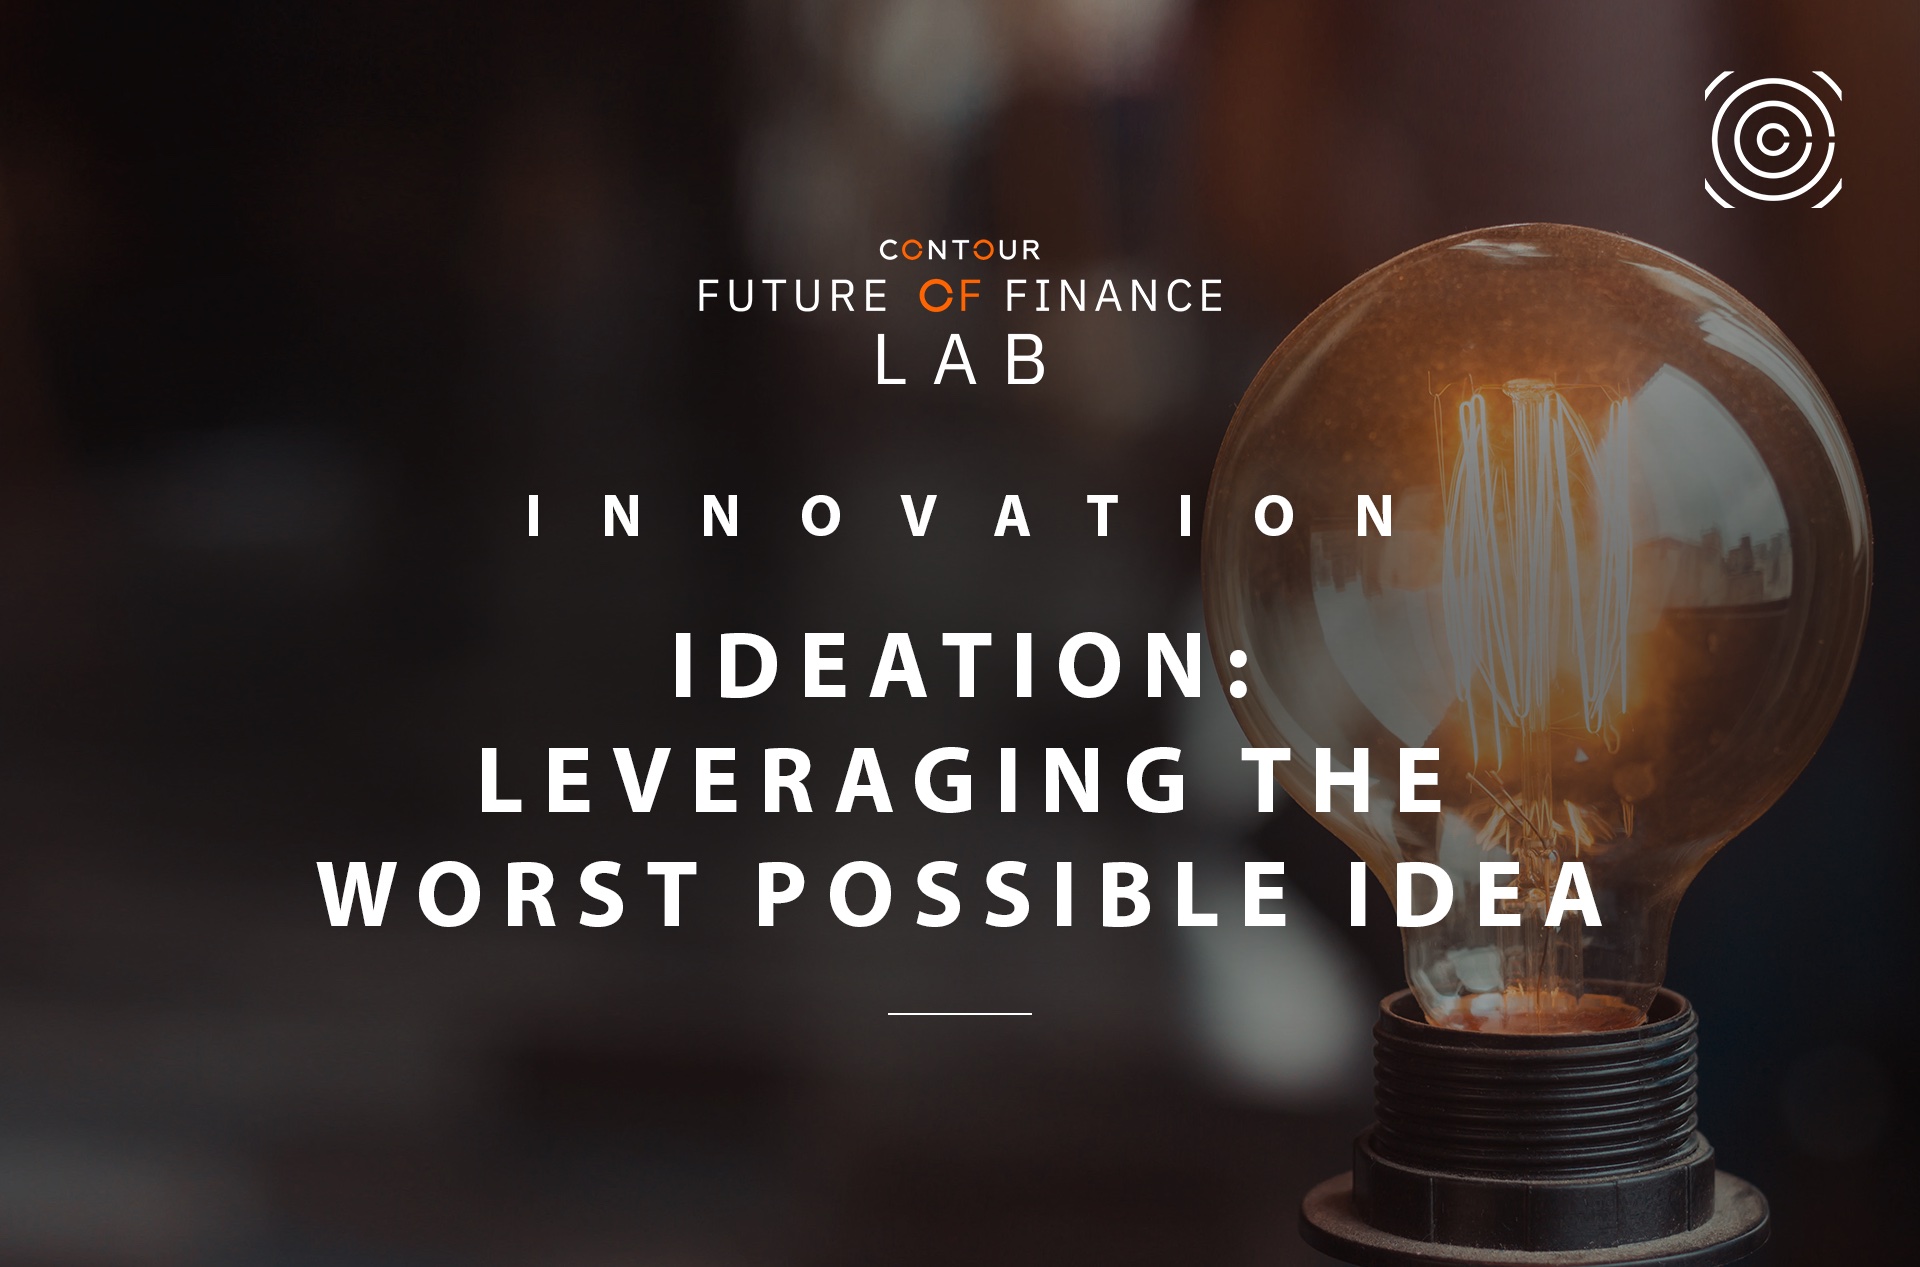 Ideation: Leveraging the Worst Possible Idea